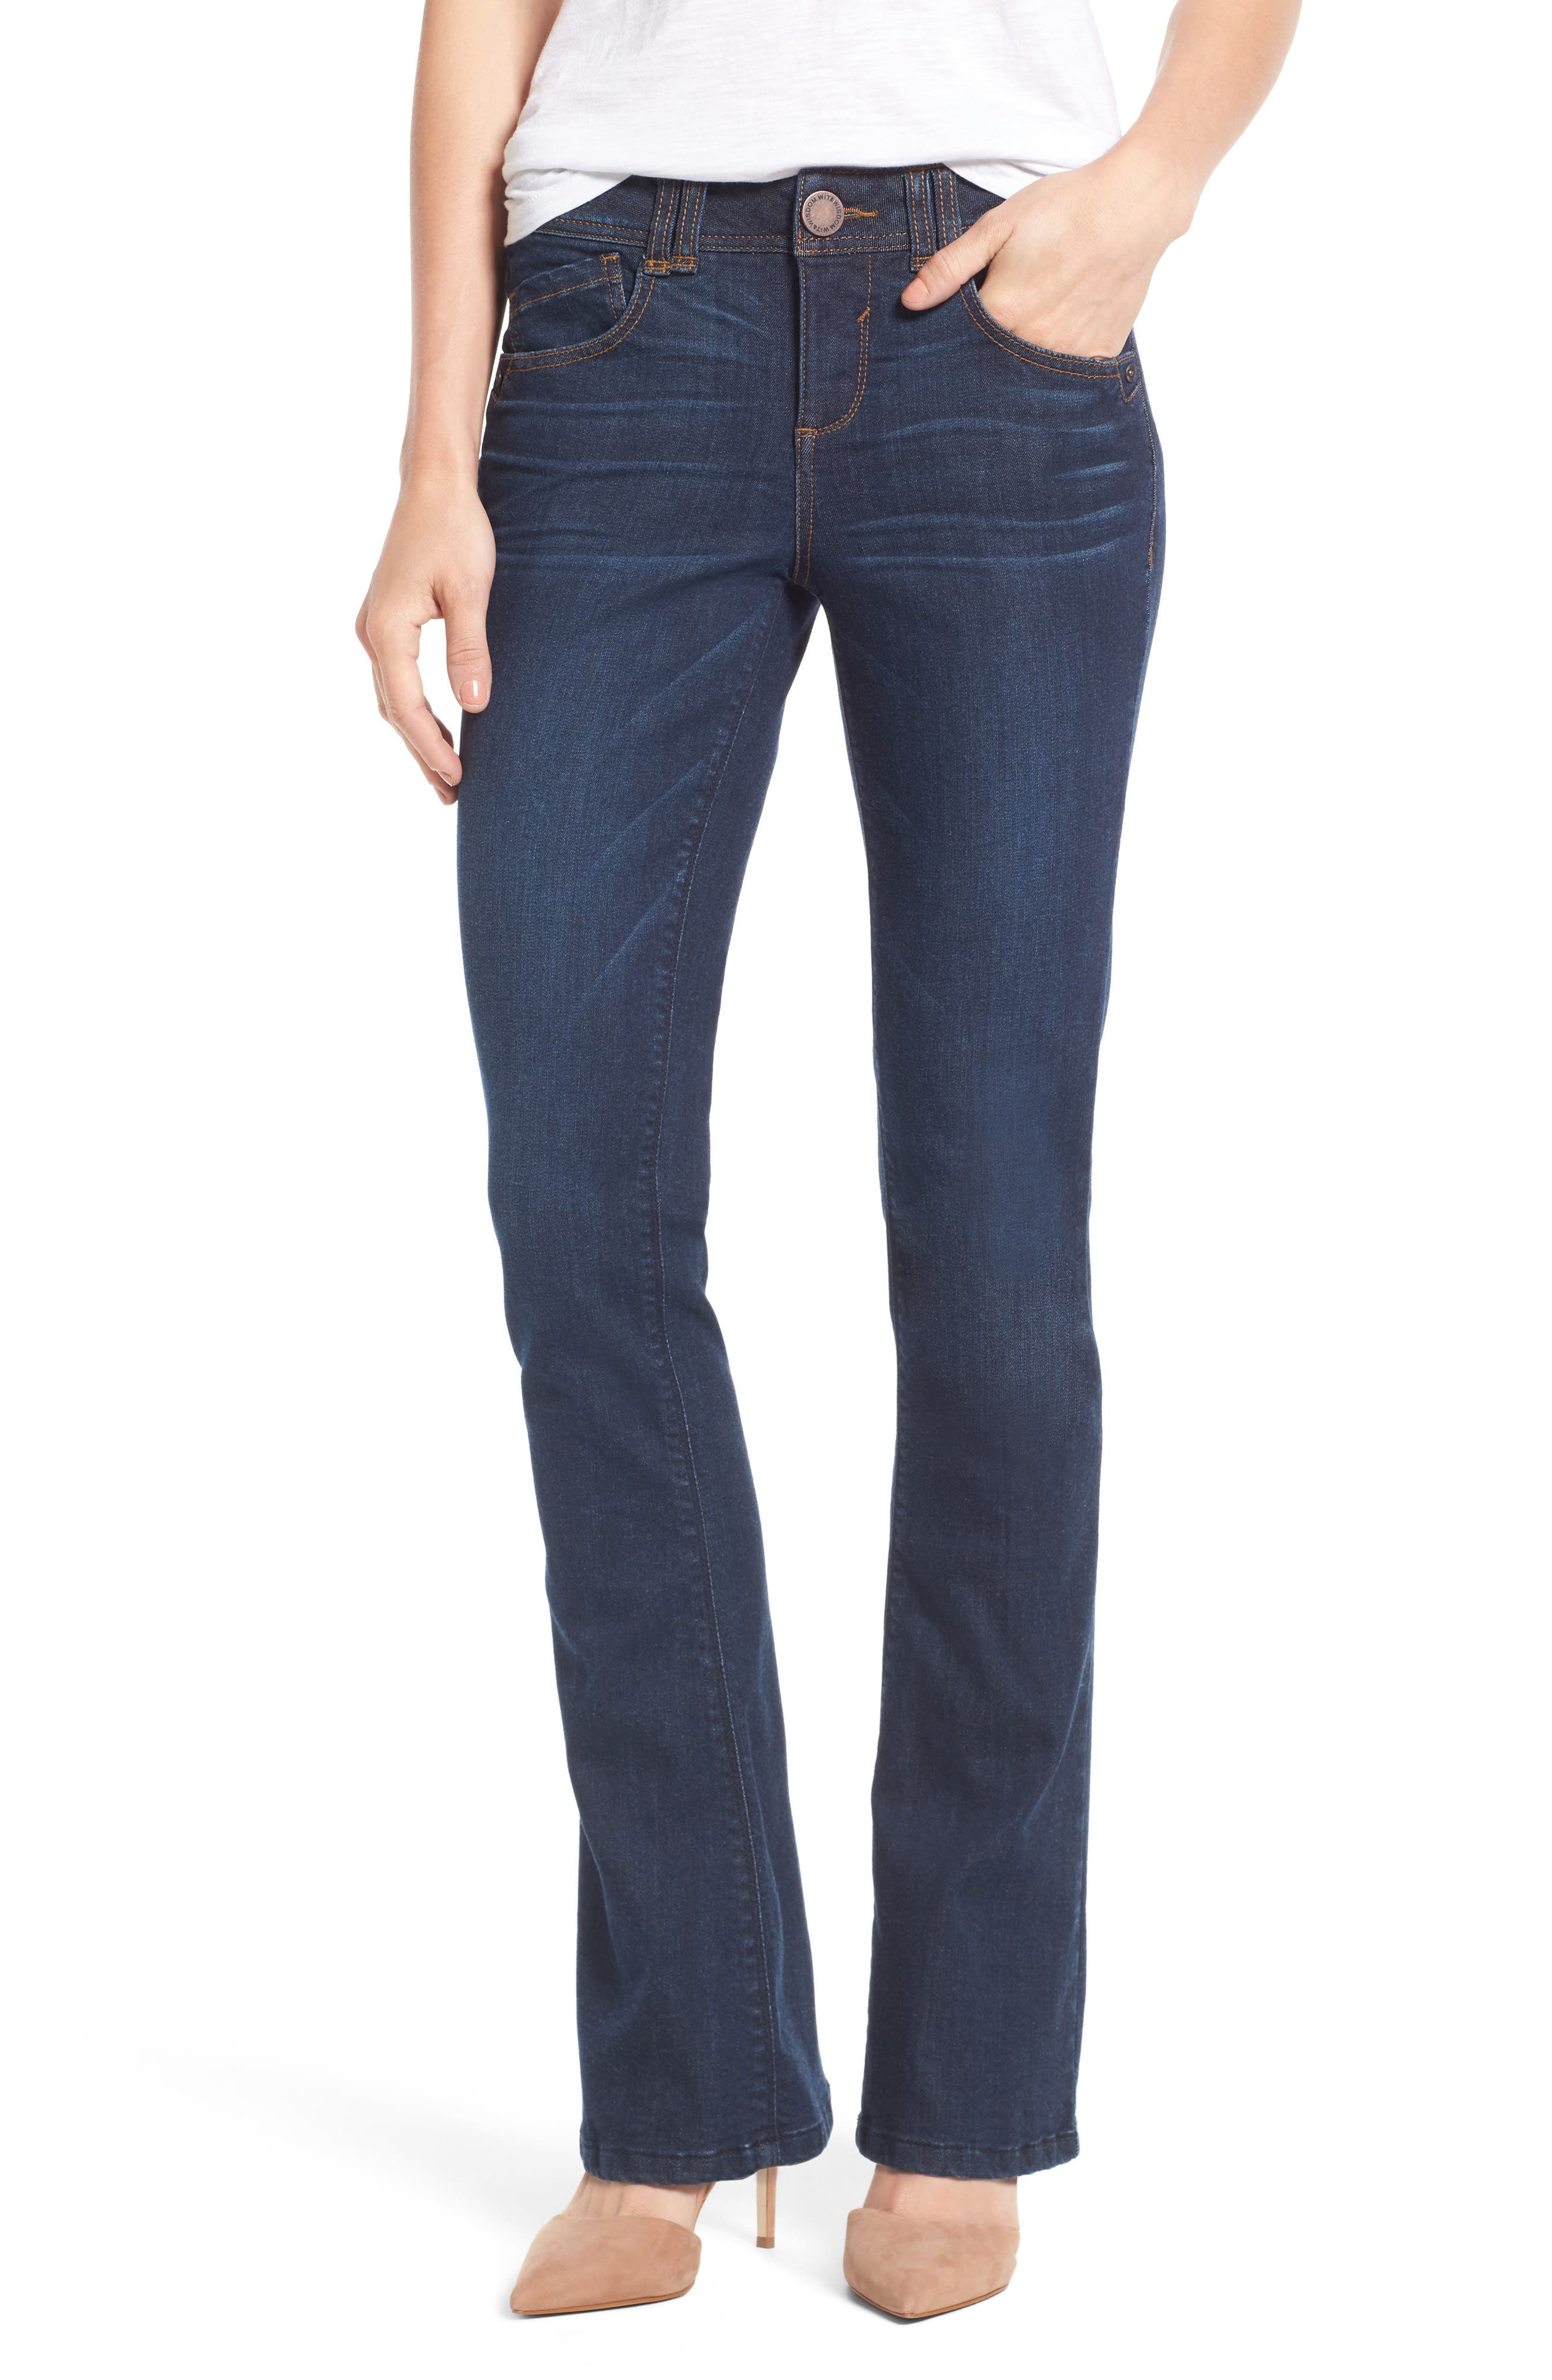 wit and wisdom petite jeans